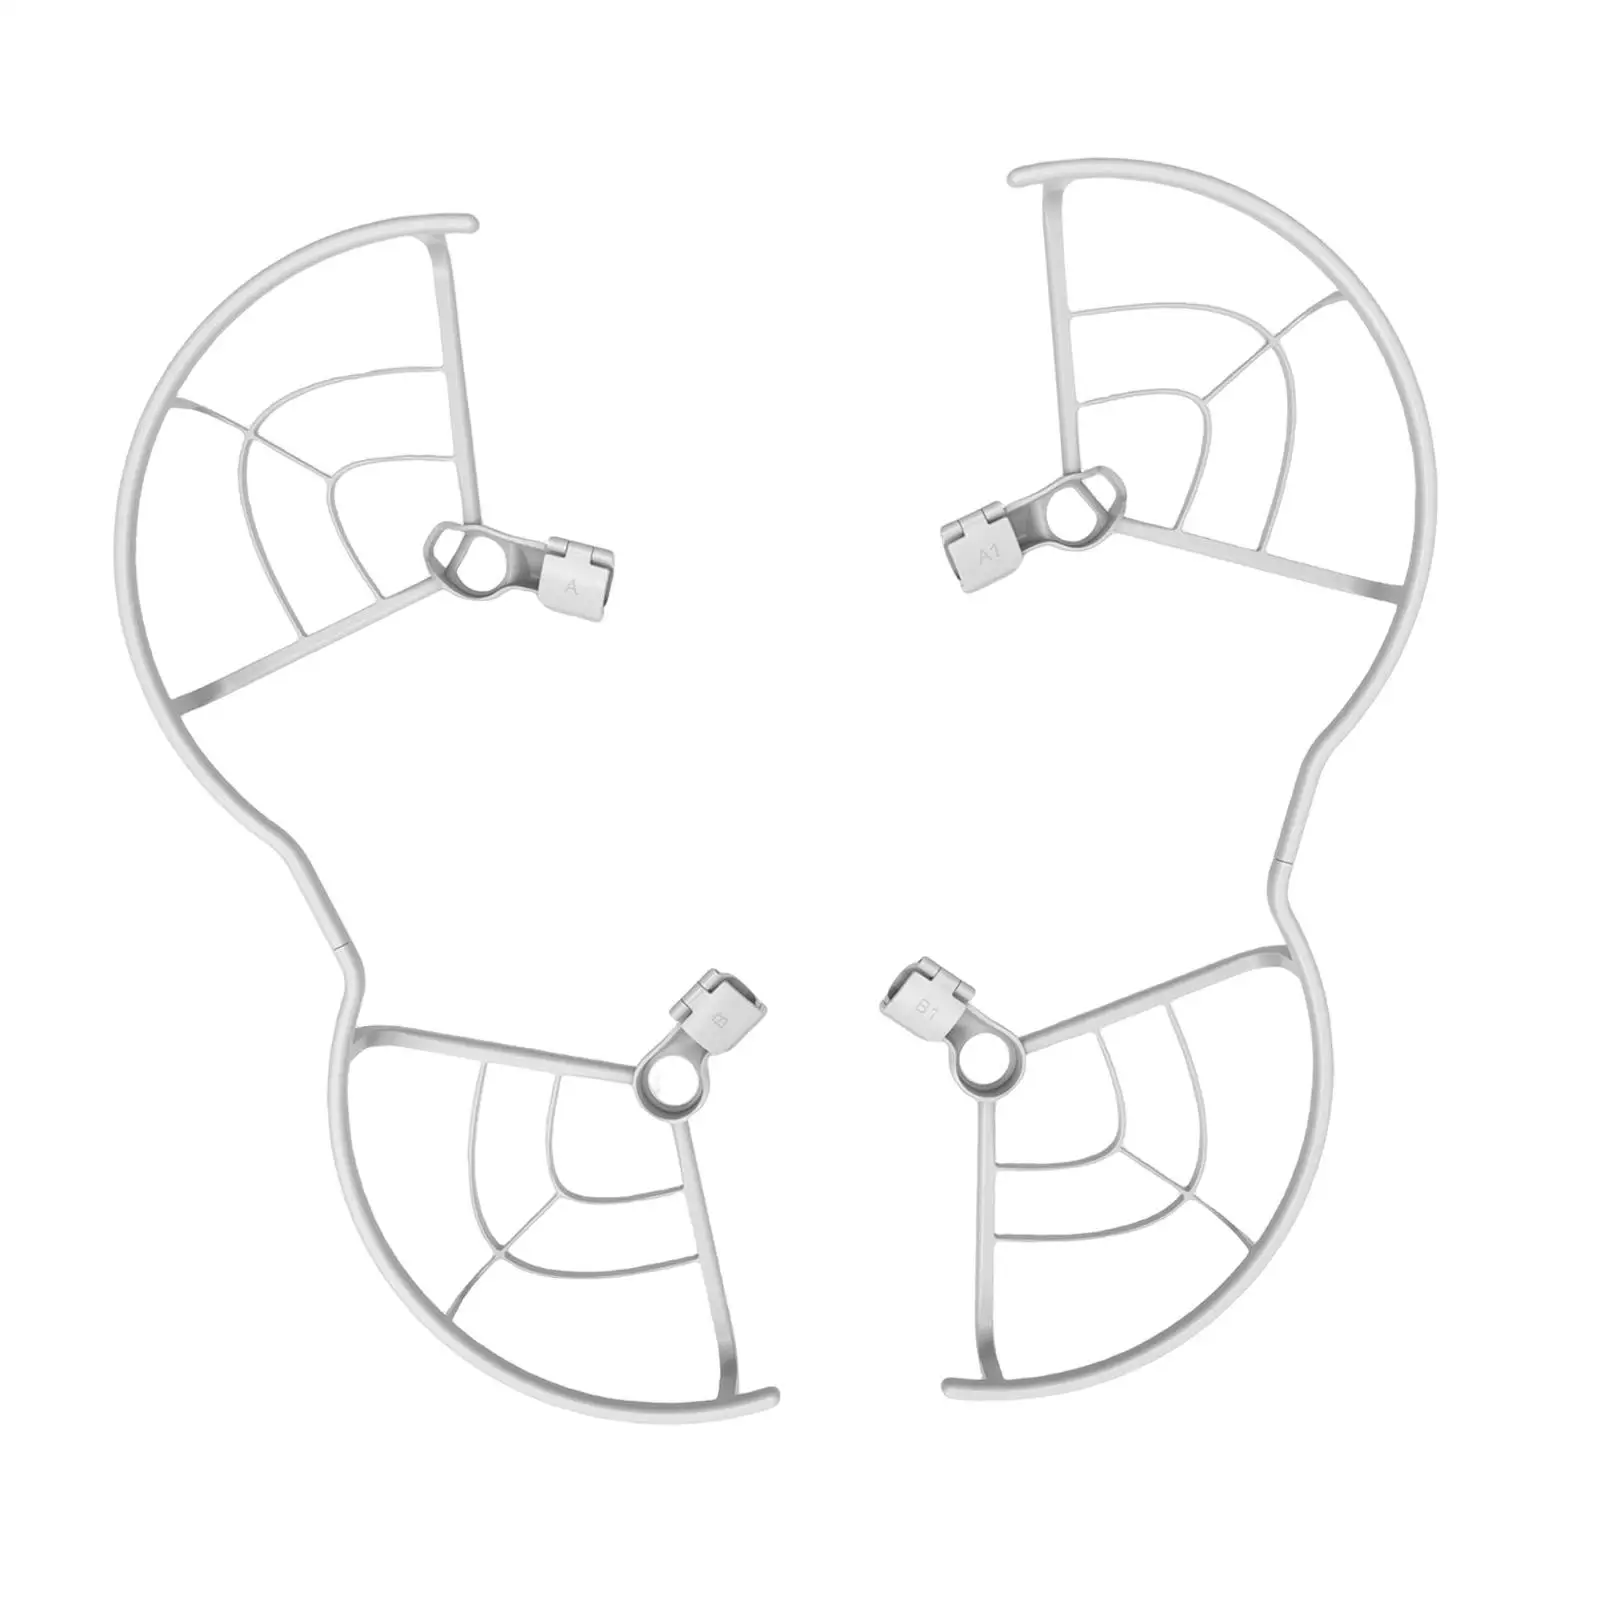 2 Pieces Professional Propeller Protector Crash Guard Drone Propeller Guards for Mini 3 Protective Accessories Drone Parts